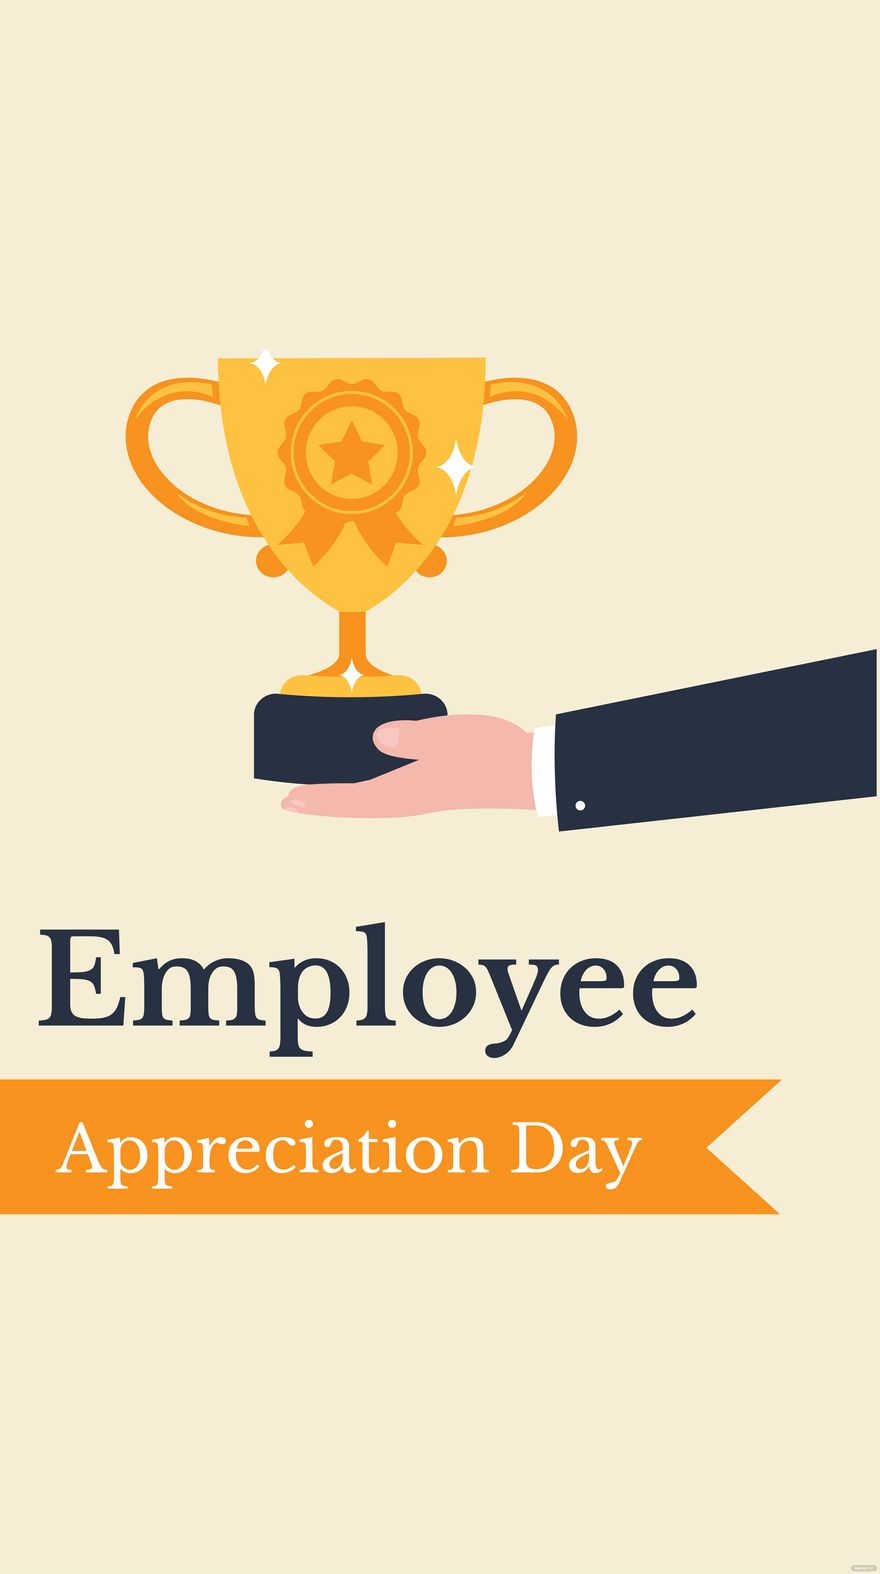 Employee Appreciation Day iPhone Background in PDF, Illustrator, PSD, EPS, SVG, JPG, PNG